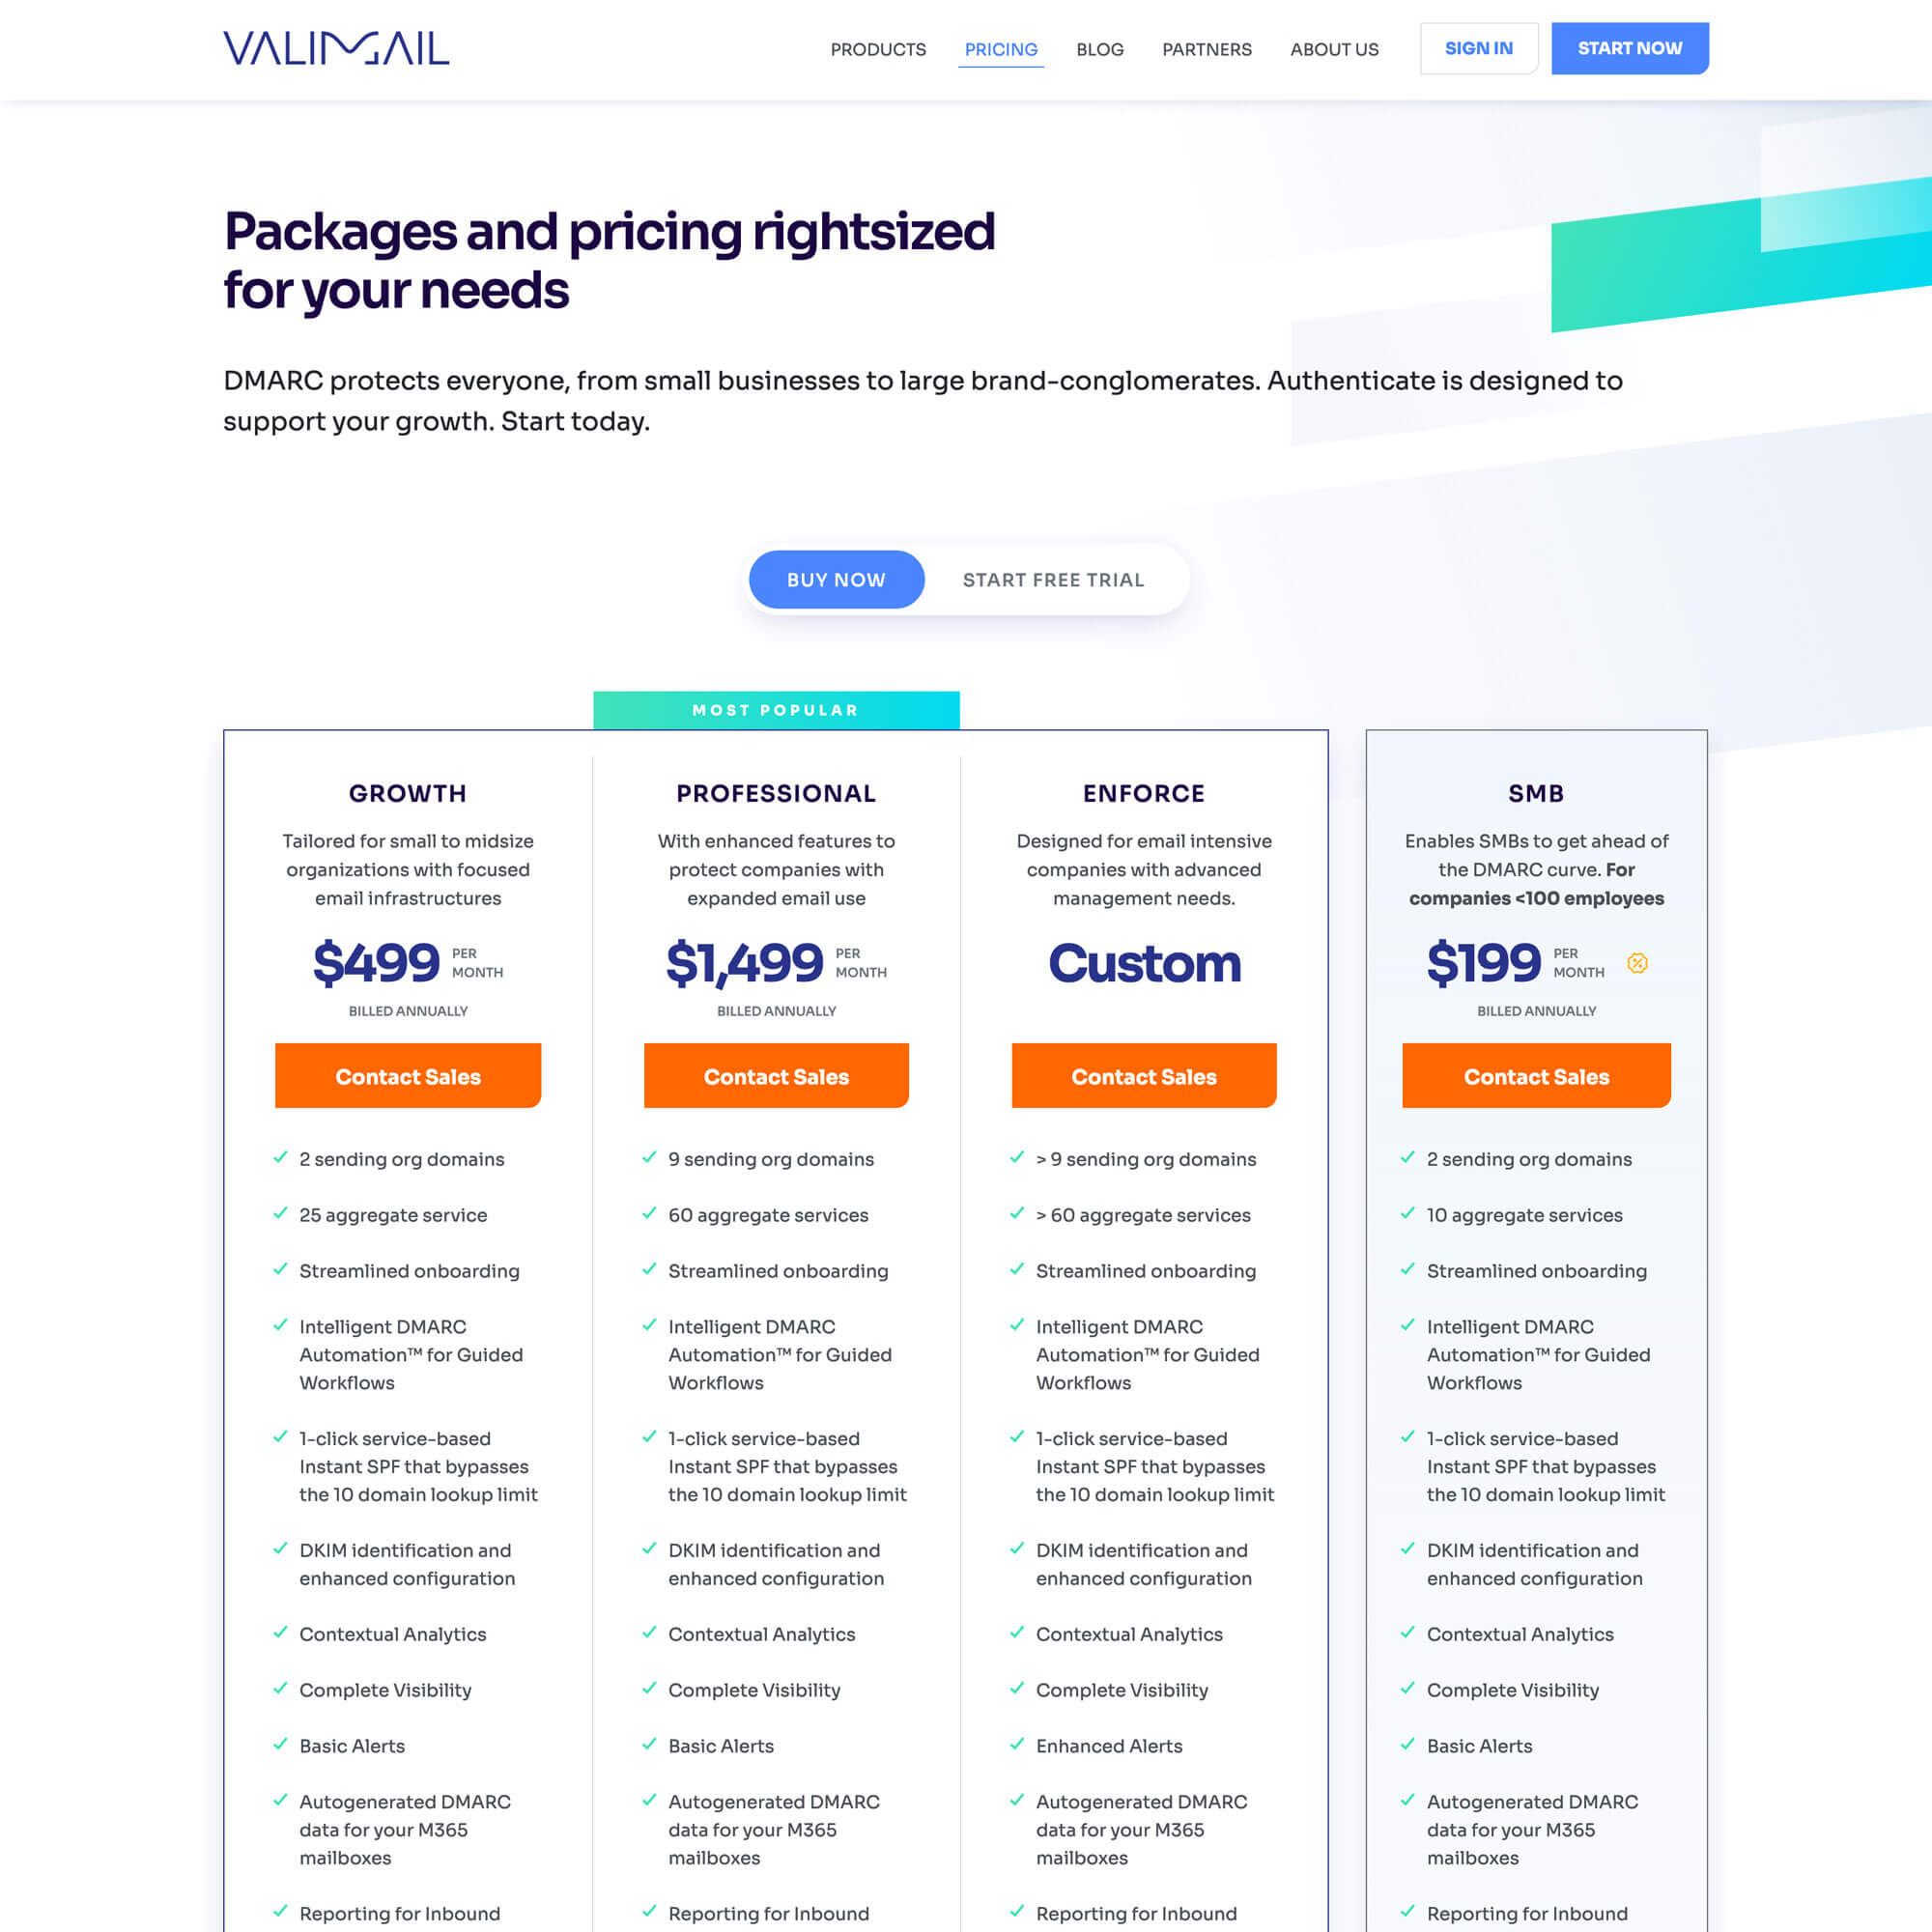 Previous Valimail pricing page